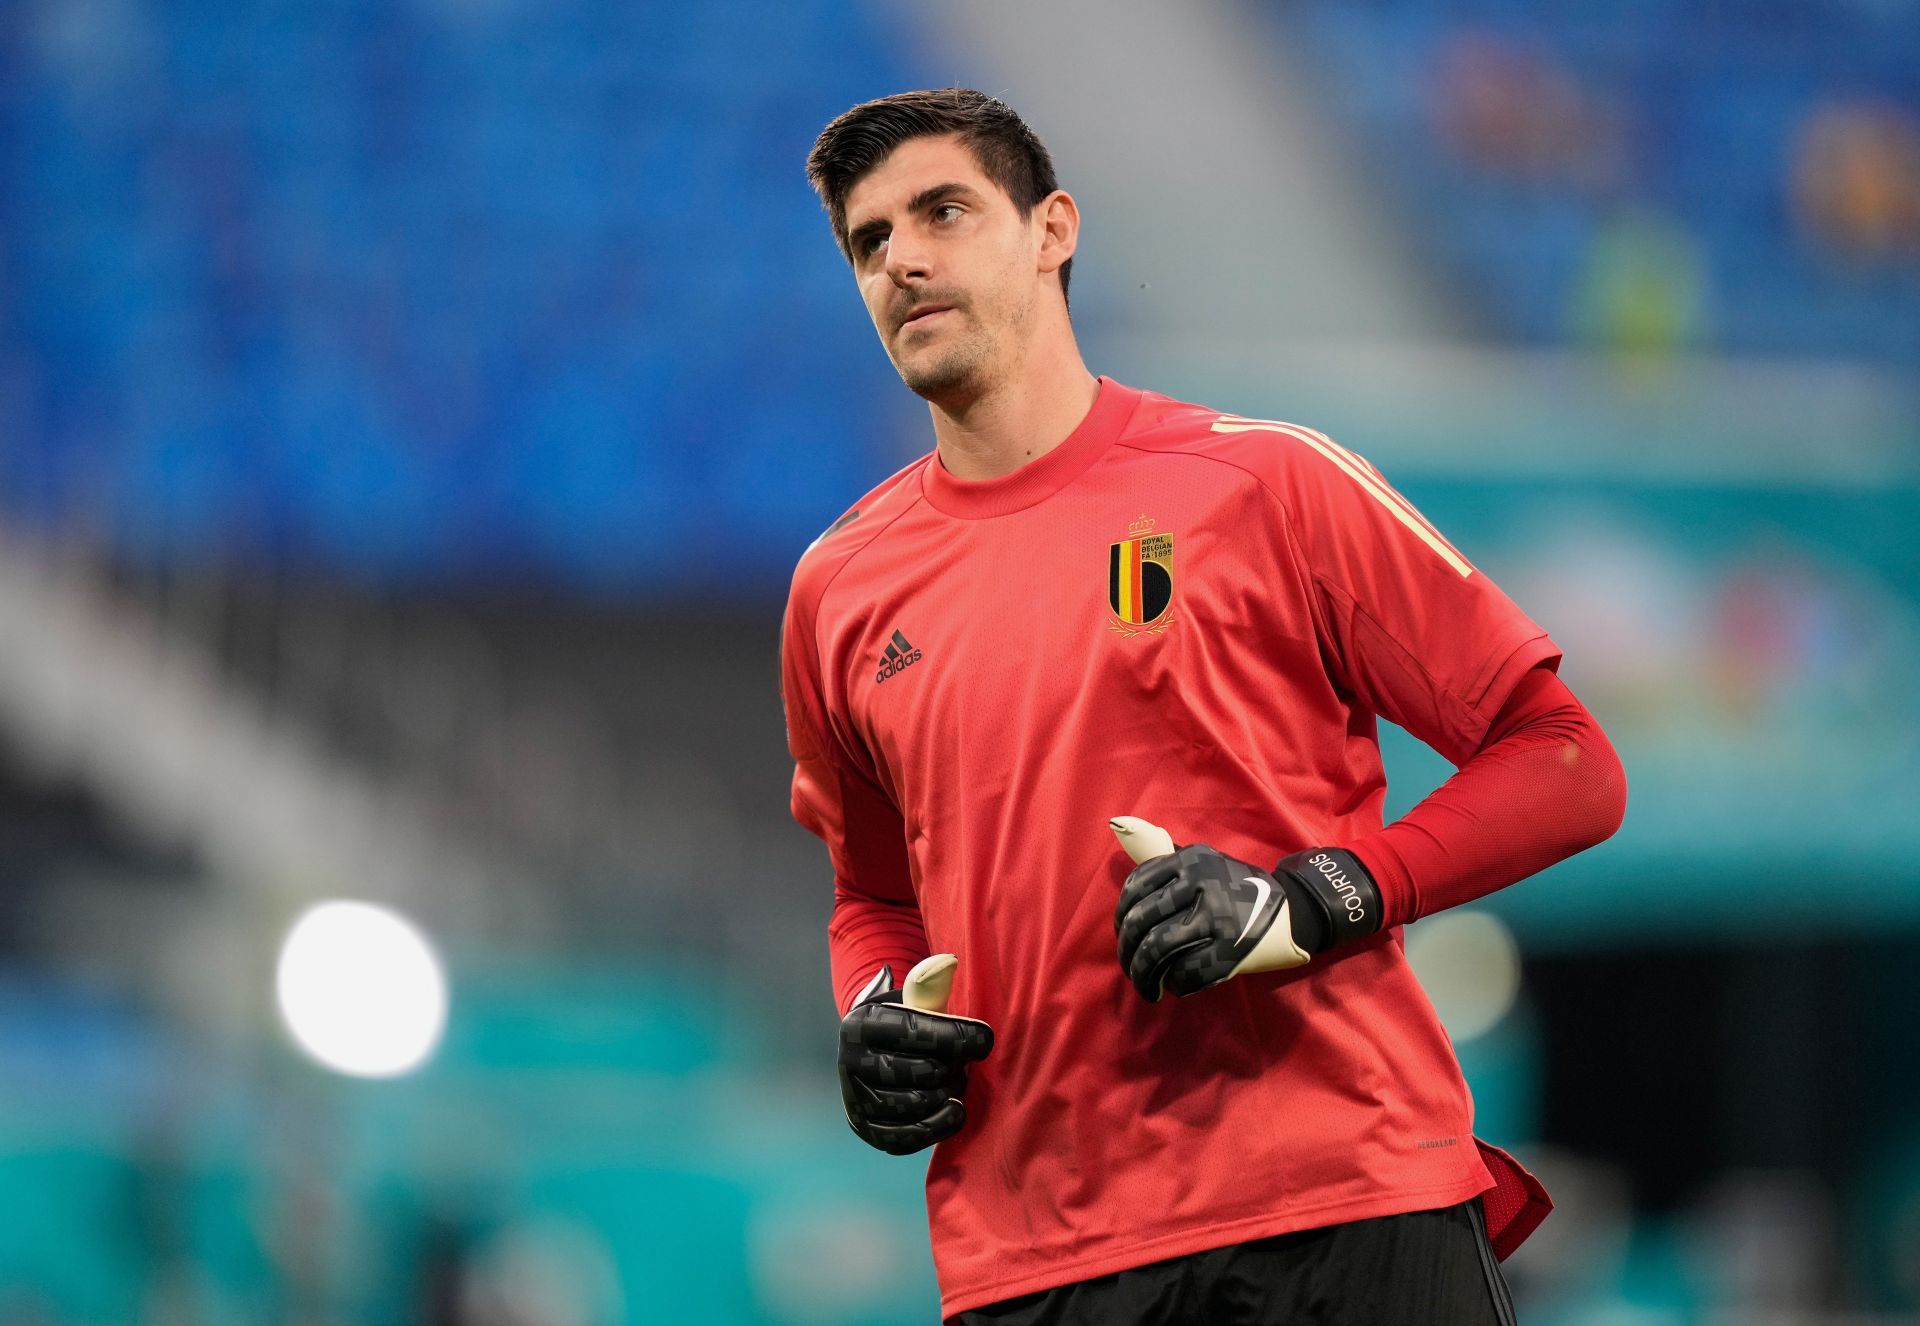 Thibaut Courtois has had an excellent stint with Los Blancos